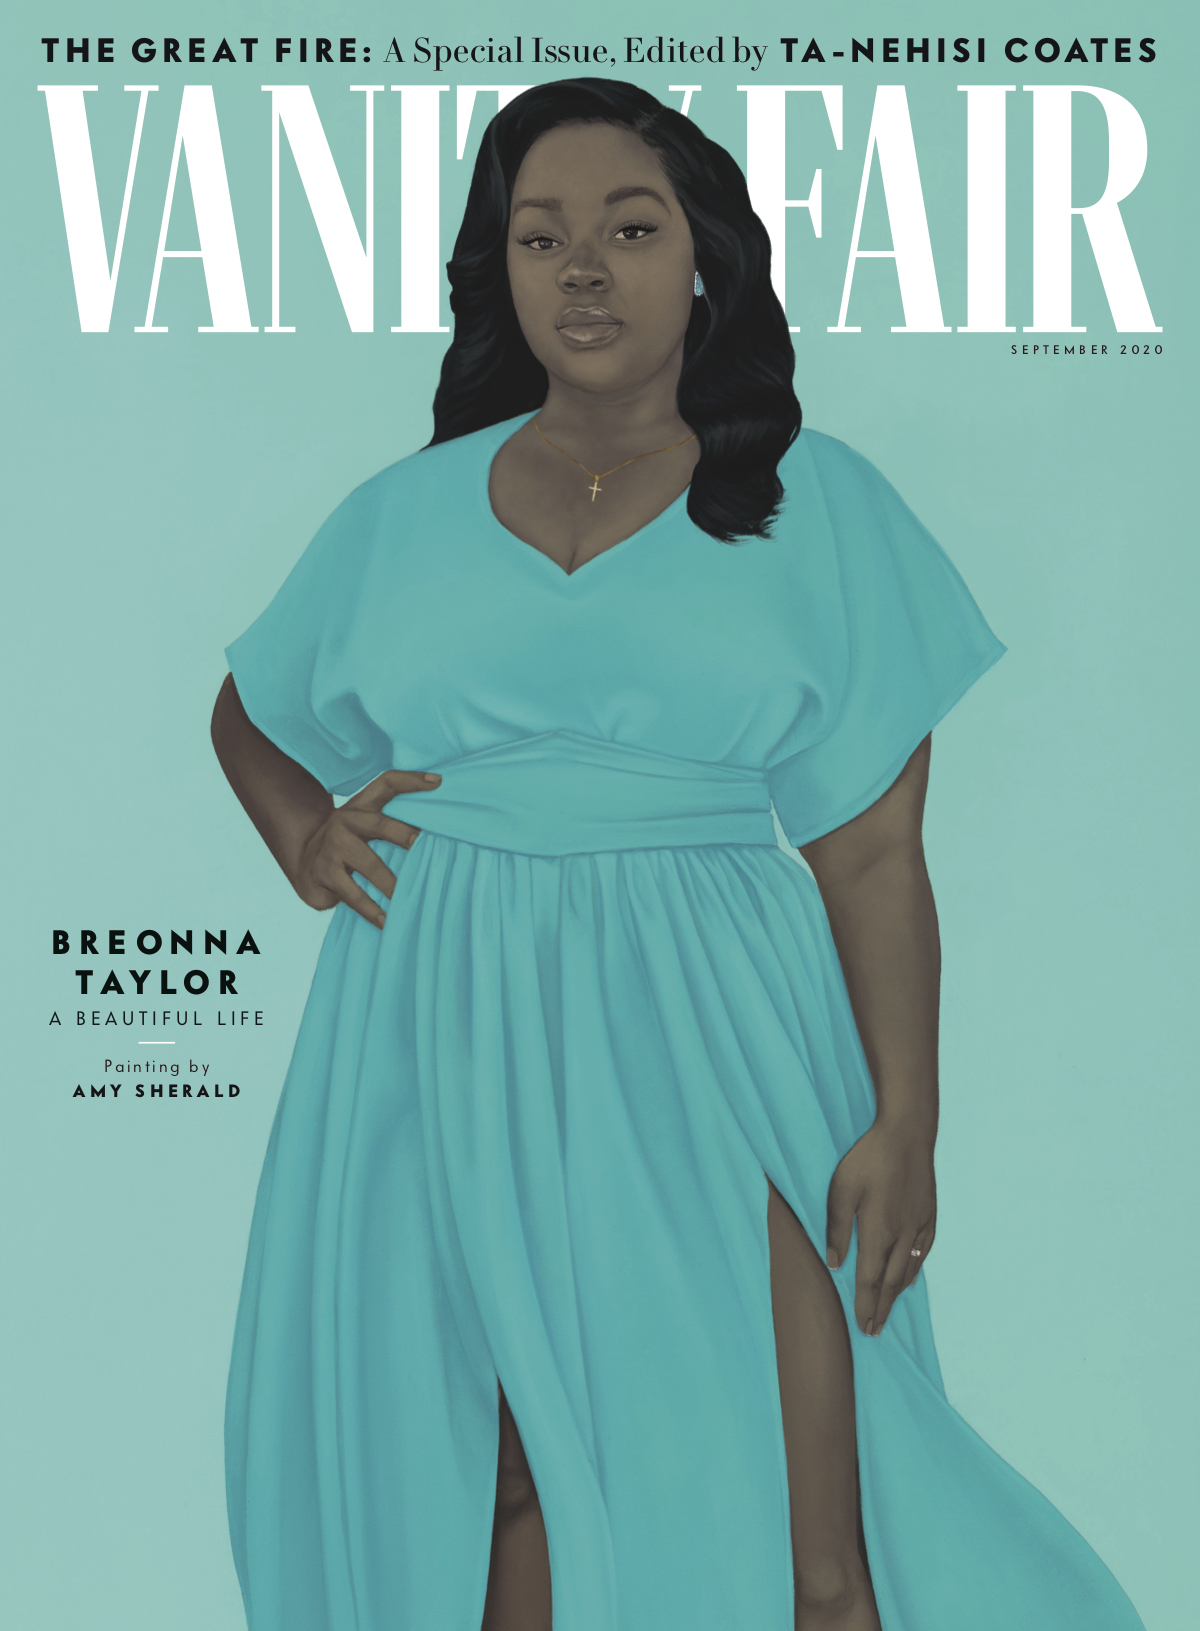 Vanity Fair September Features Portrait of Breonna Taylor